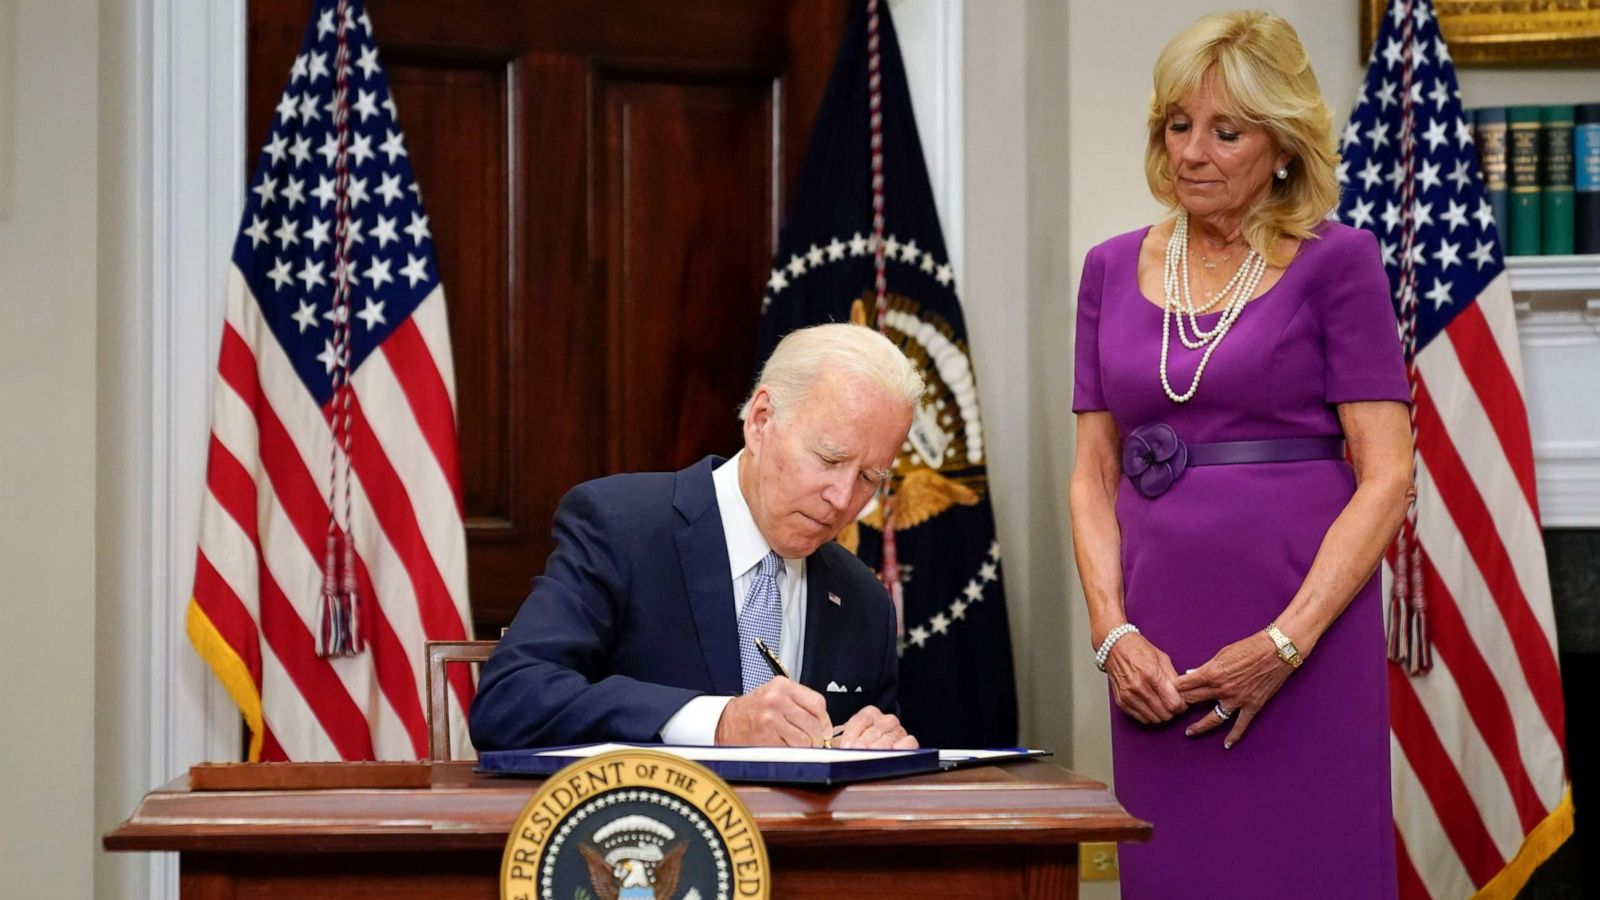 Biden signs bipartisan gun safety package into law - ABC News